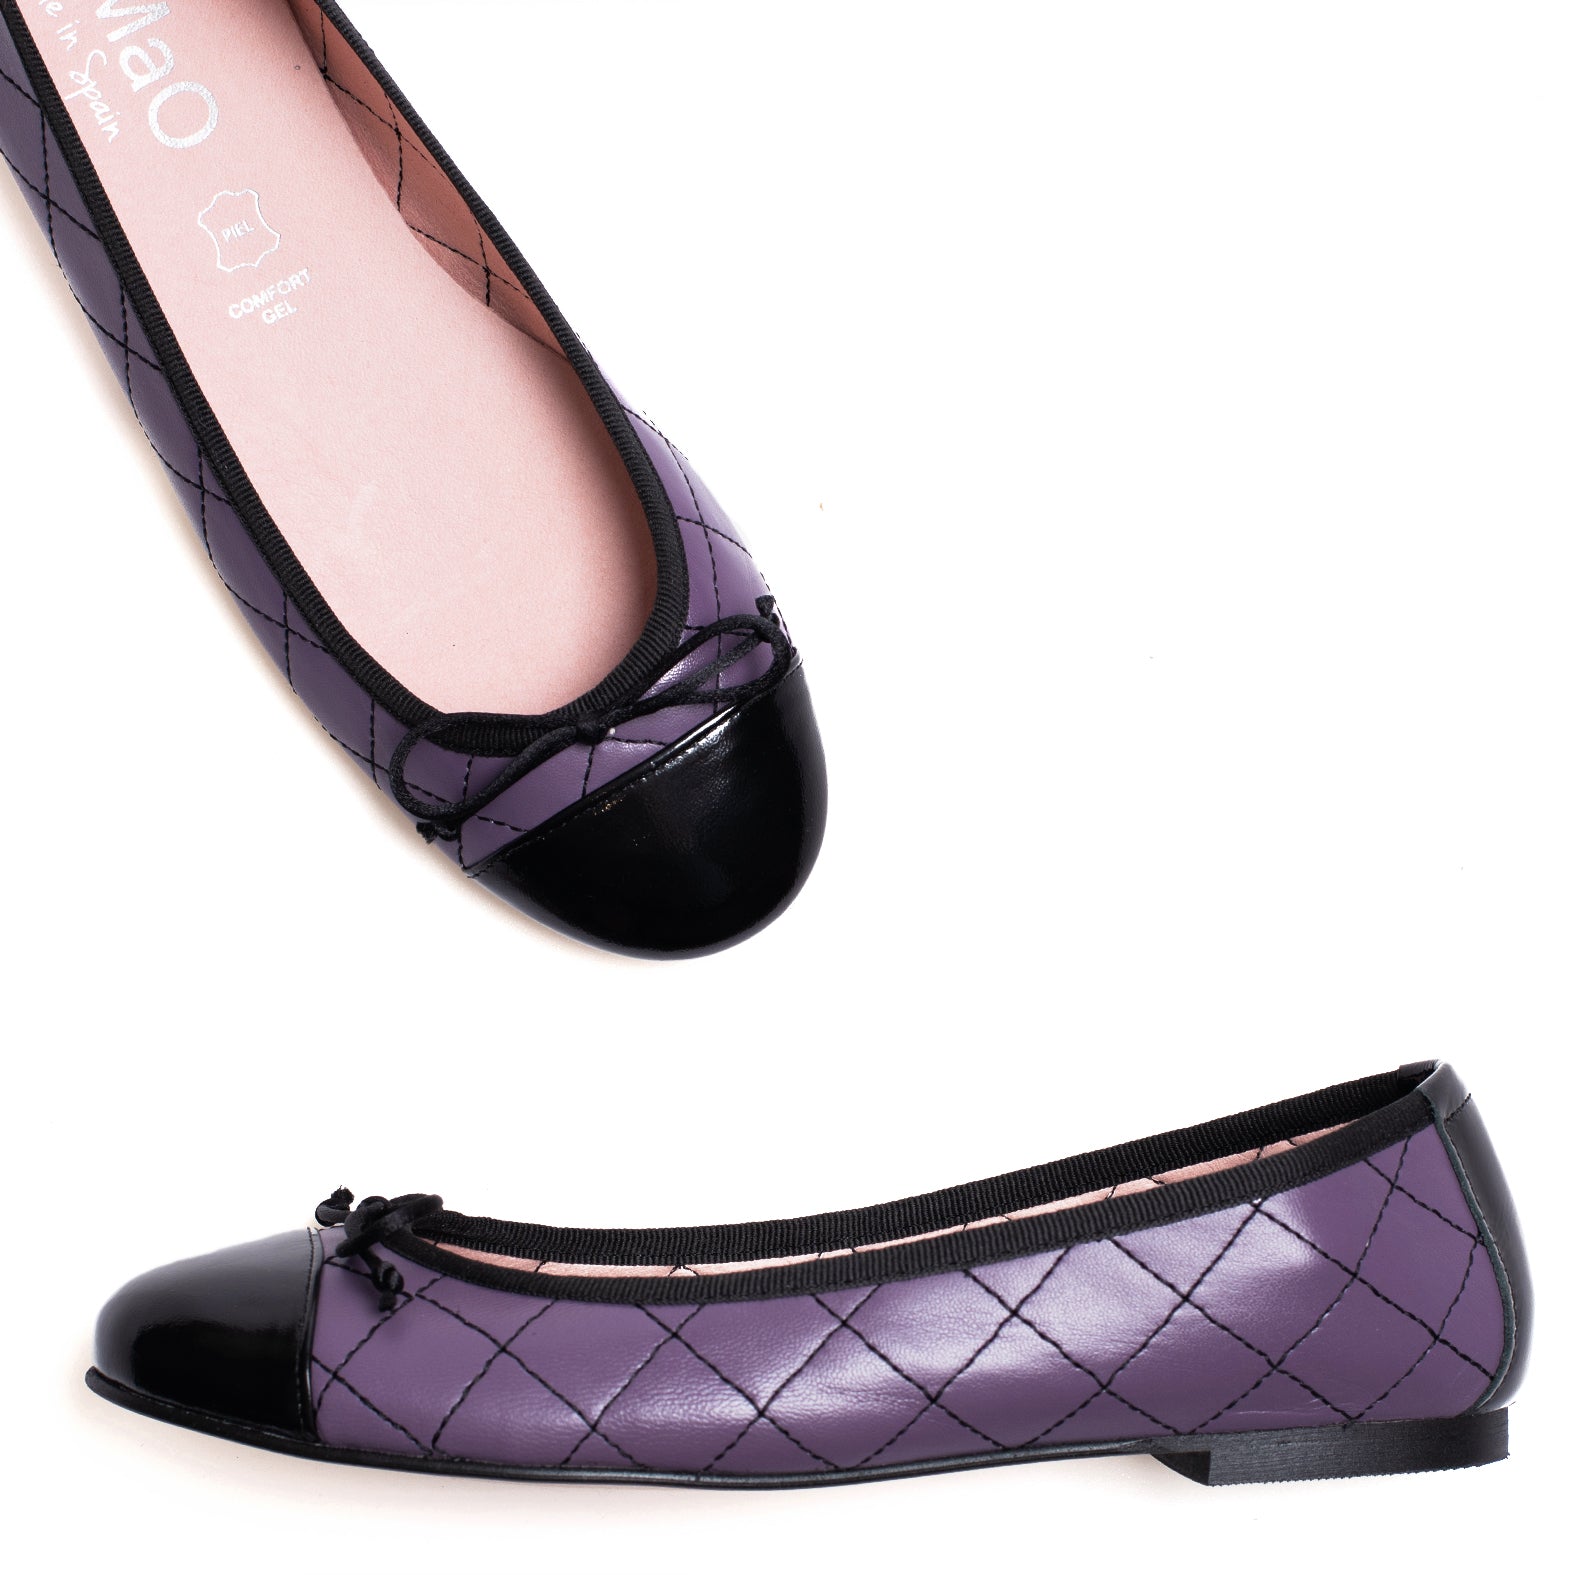 BALLERINA – LILAC quilted leather Ballerina